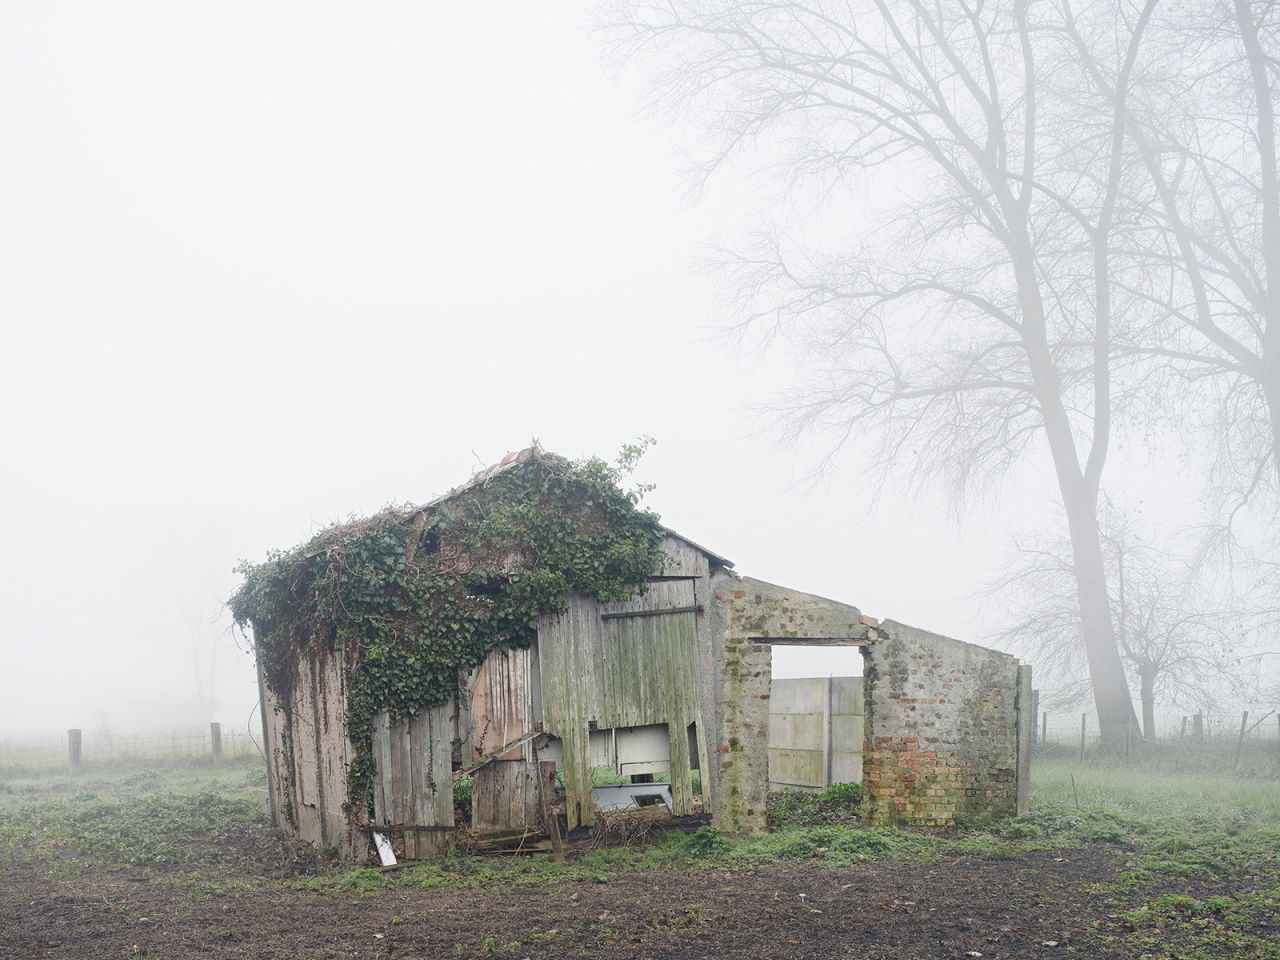 Shortlisted in the sense of place category, Servaas Van Belle's photo "Vernacular Animal Shed" was taken in Lissewge, Belgium.